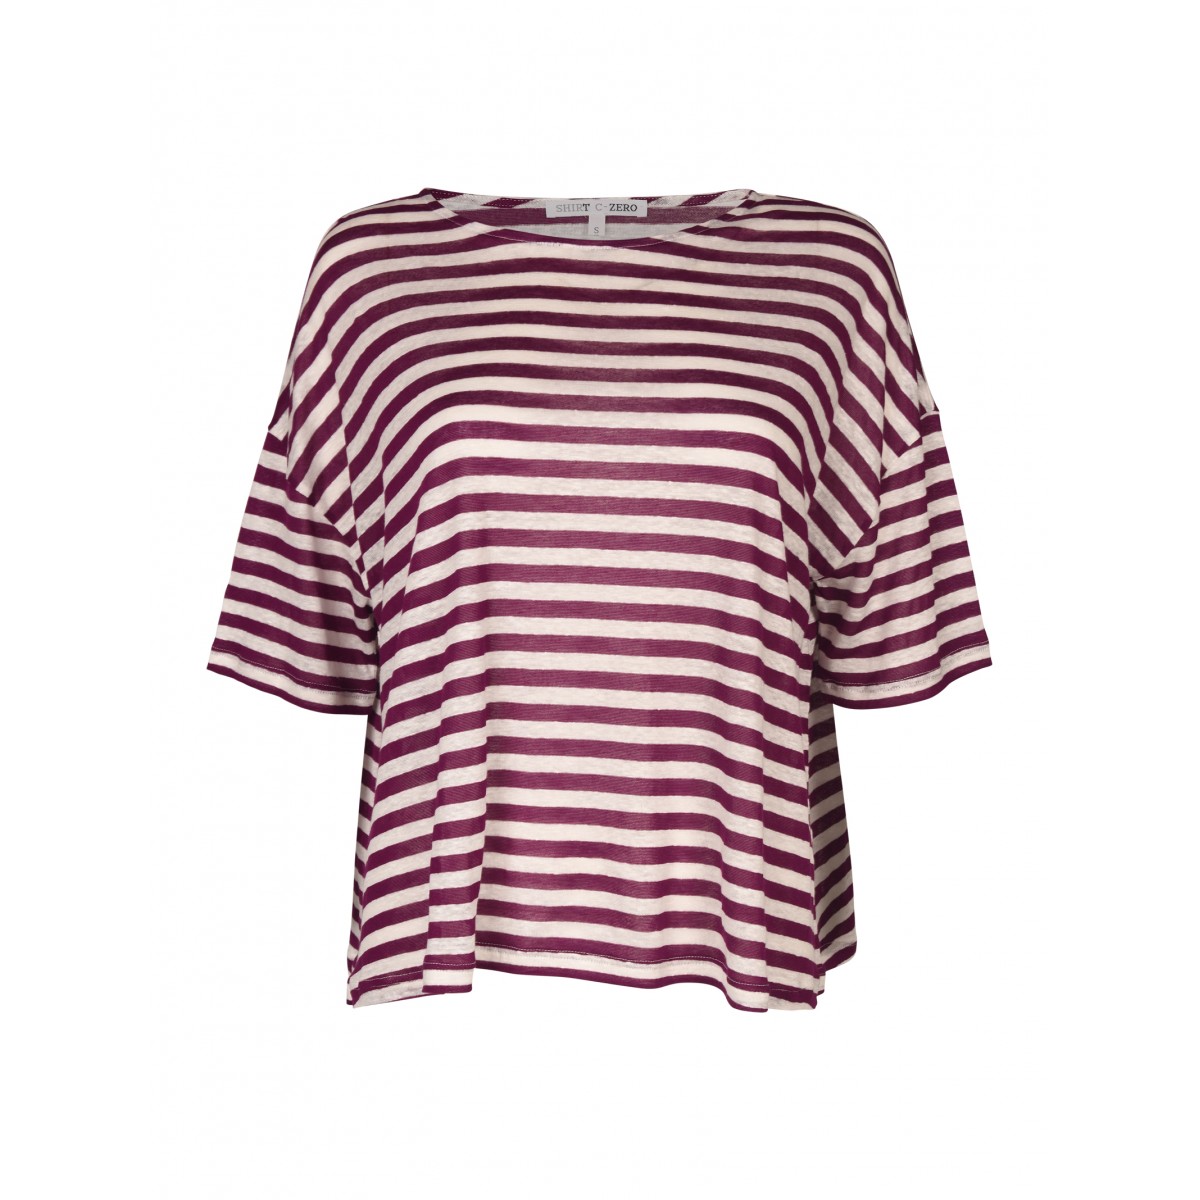 Burgundy and White striped linen T-Shirt